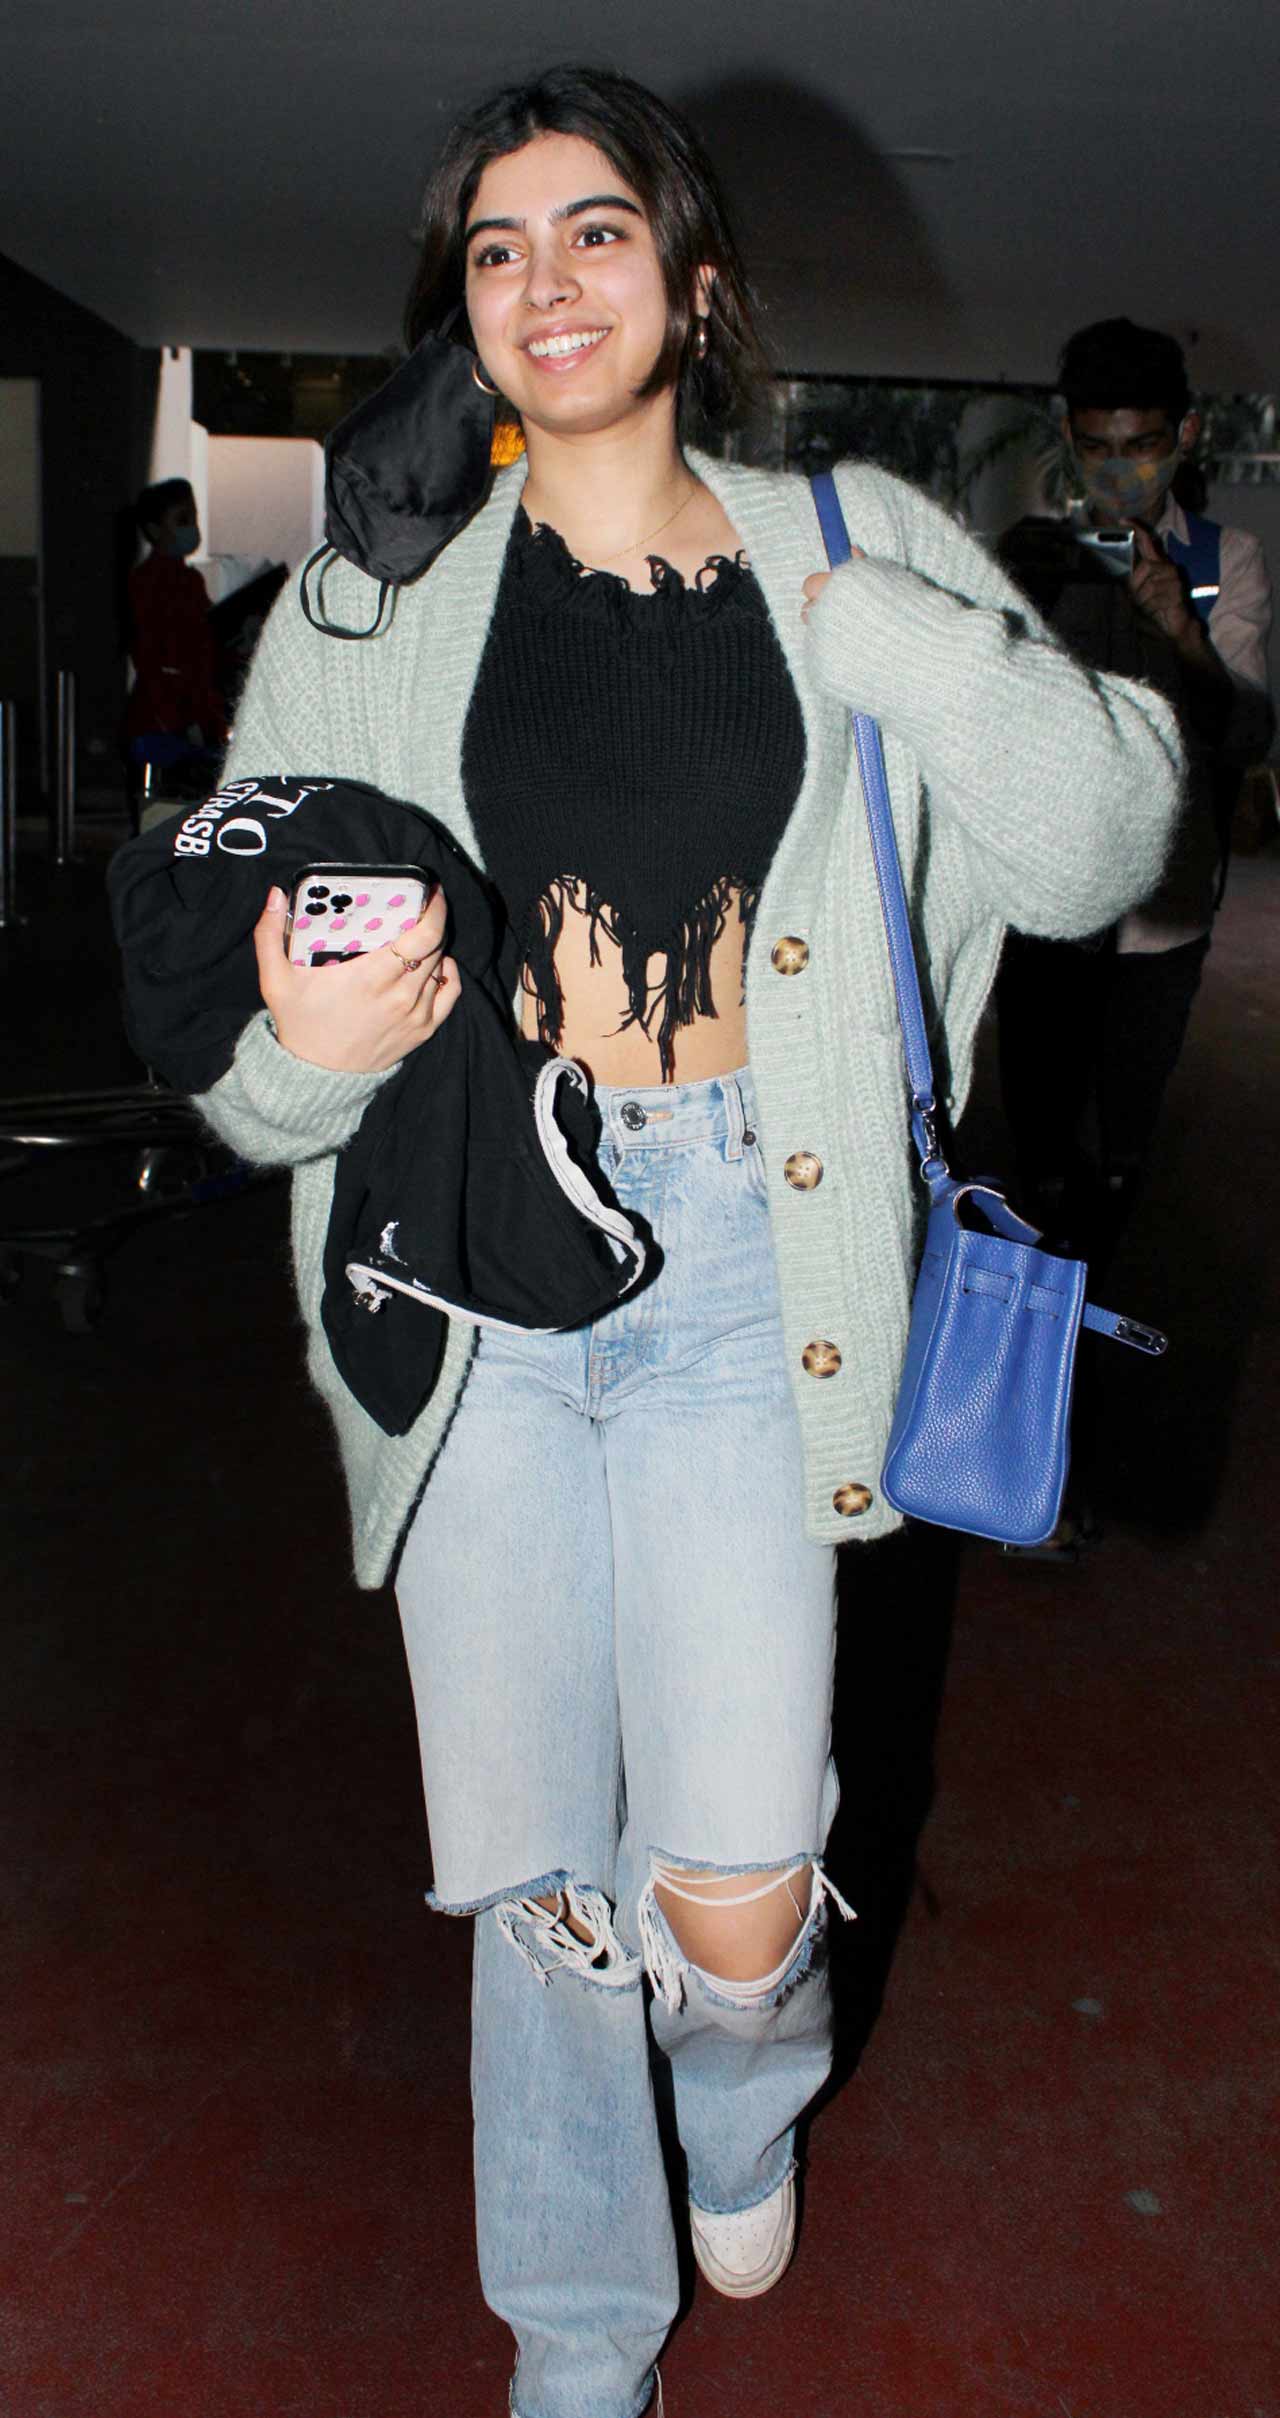 Boney Kapoor's daughter Khushi Kapoor was snapped at the airport too.